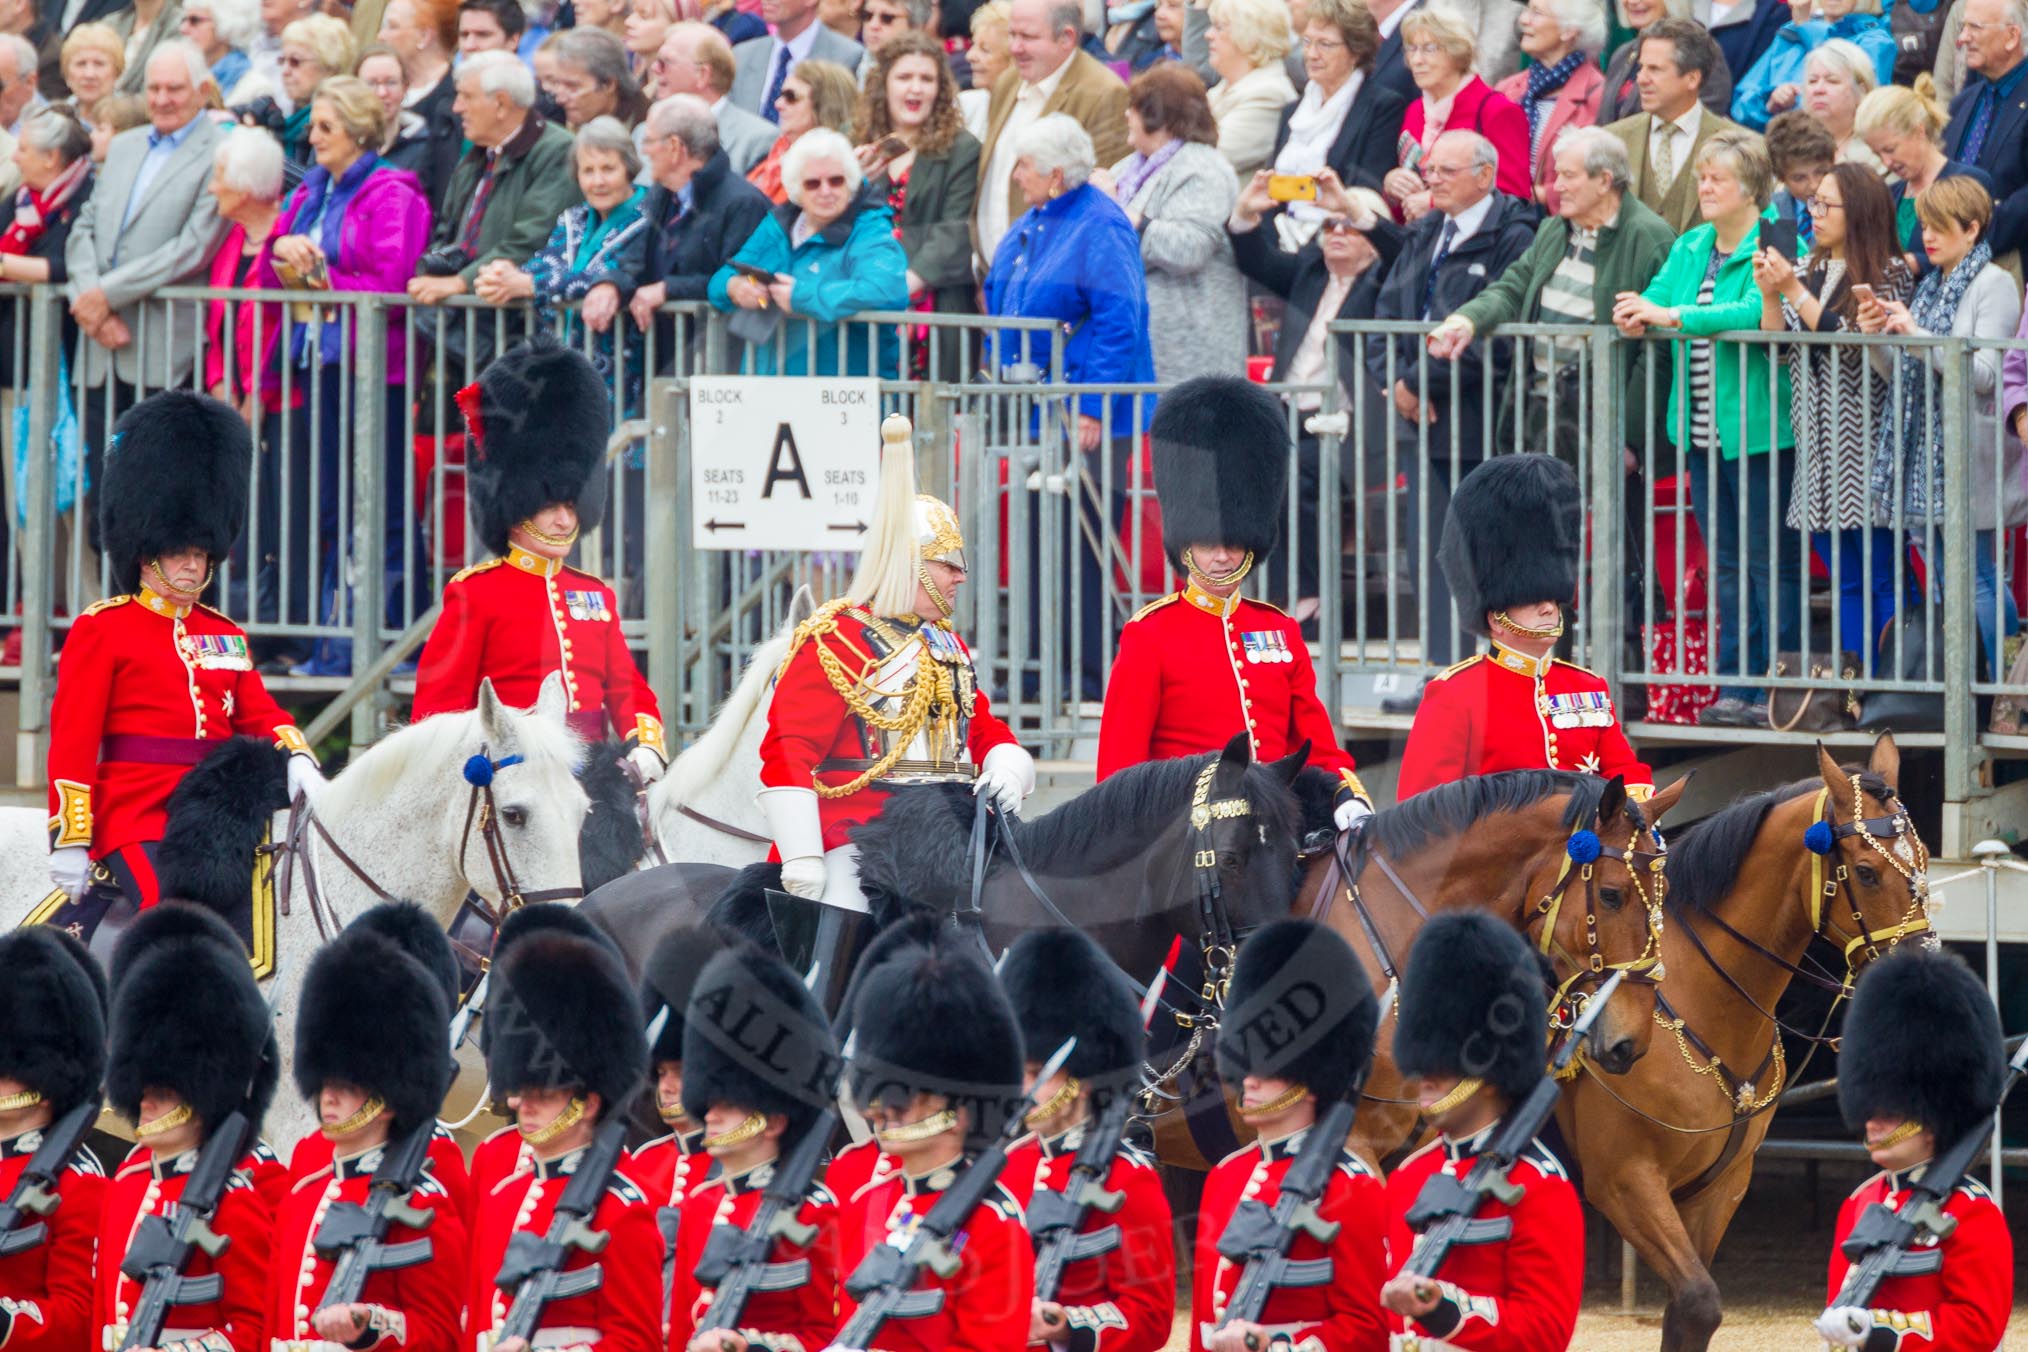 The Colonel's Review 2016.
Horse Guards Parade, Westminster,
London,

United Kingdom,
on 04 June 2016 at 10:59, image #165